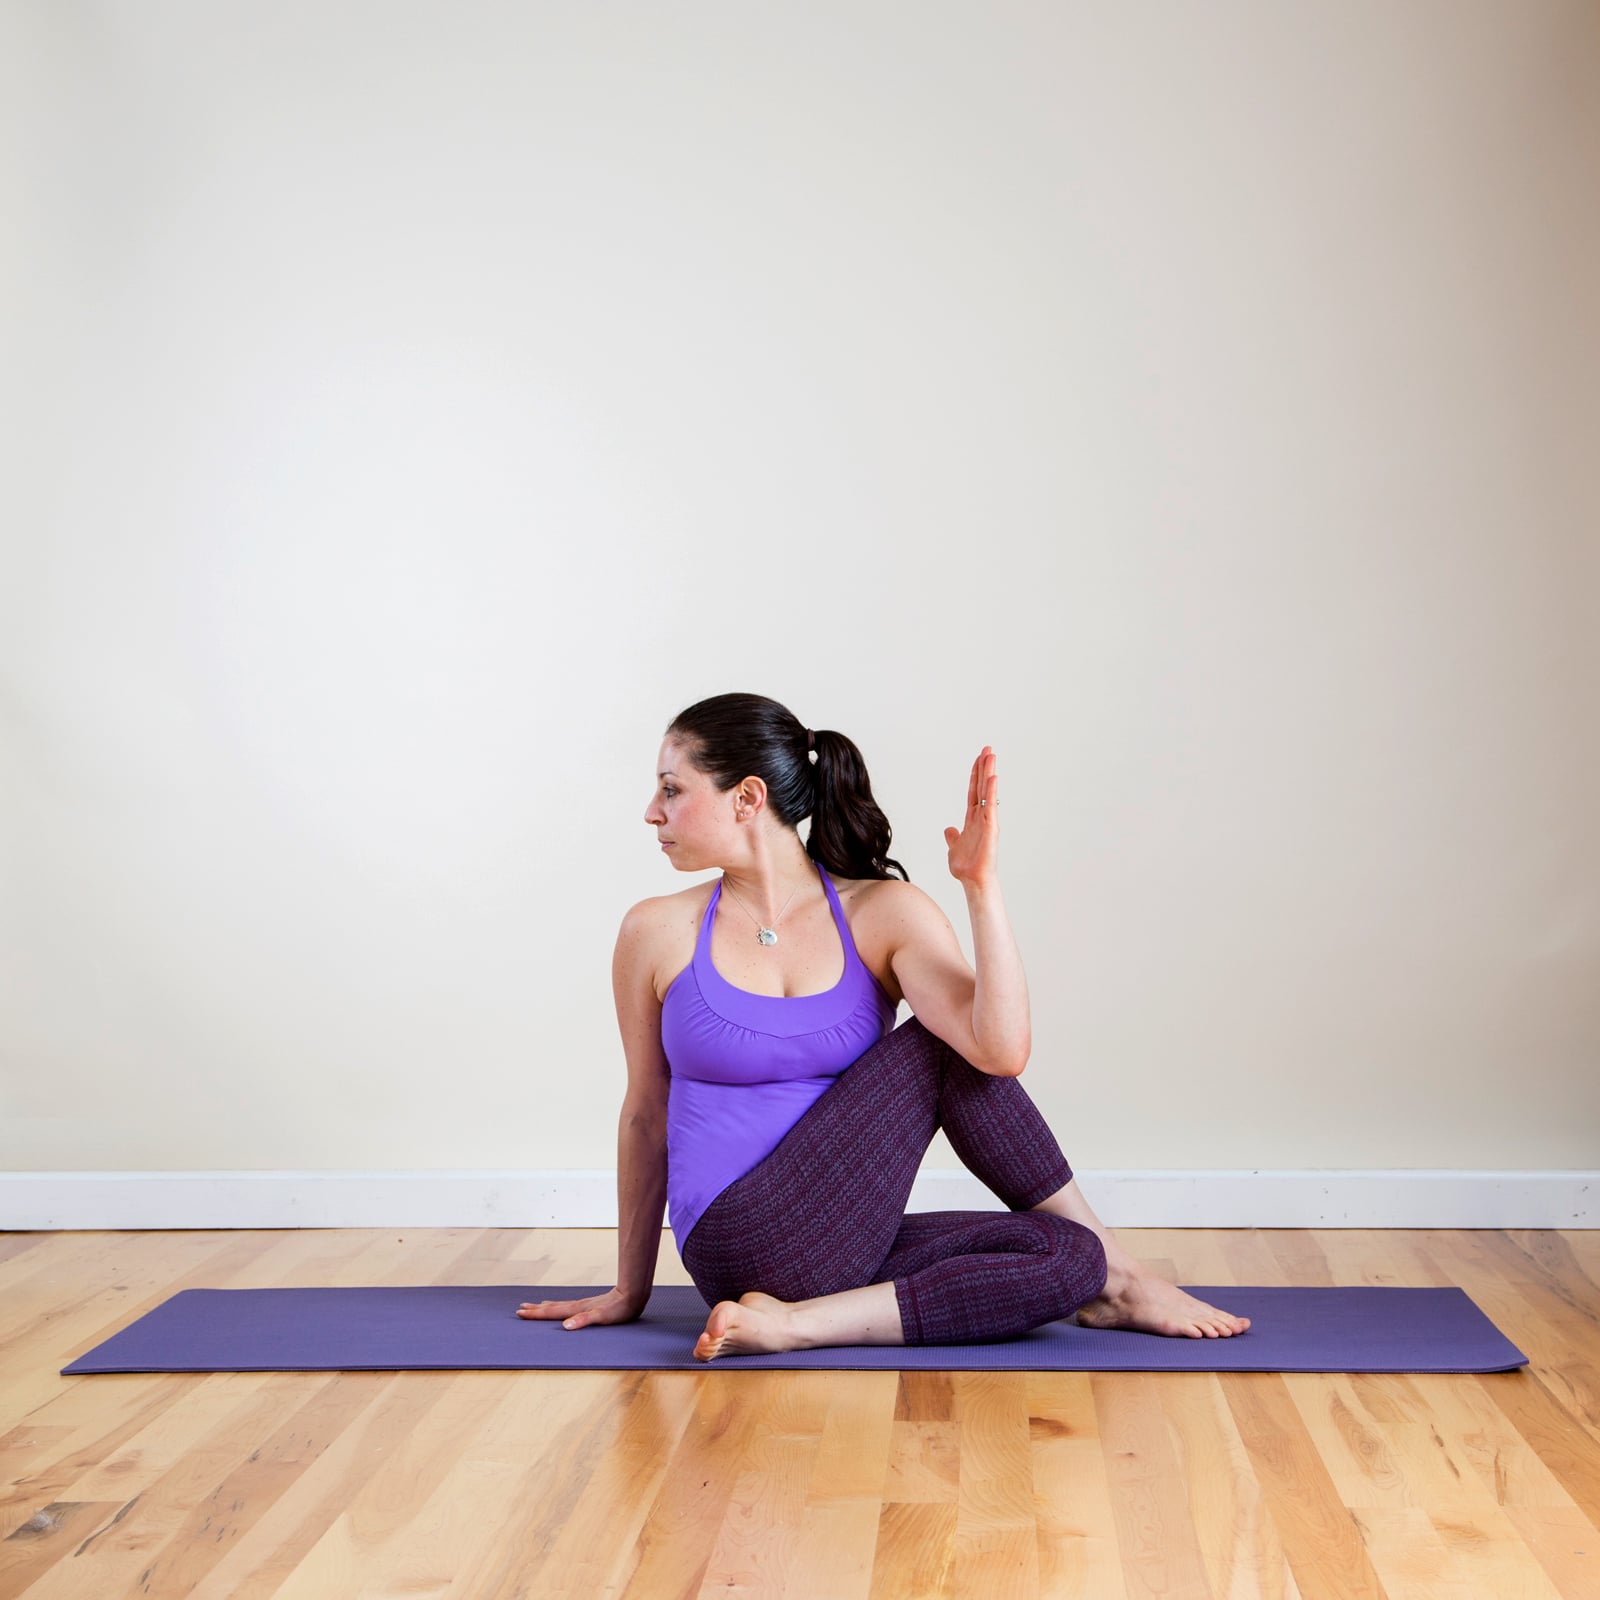 5 Yoga Poses for Pregnancy Straight from a Pregnant Yoga Pro! - Page 2 of 5  - Fit Bottomed Girls